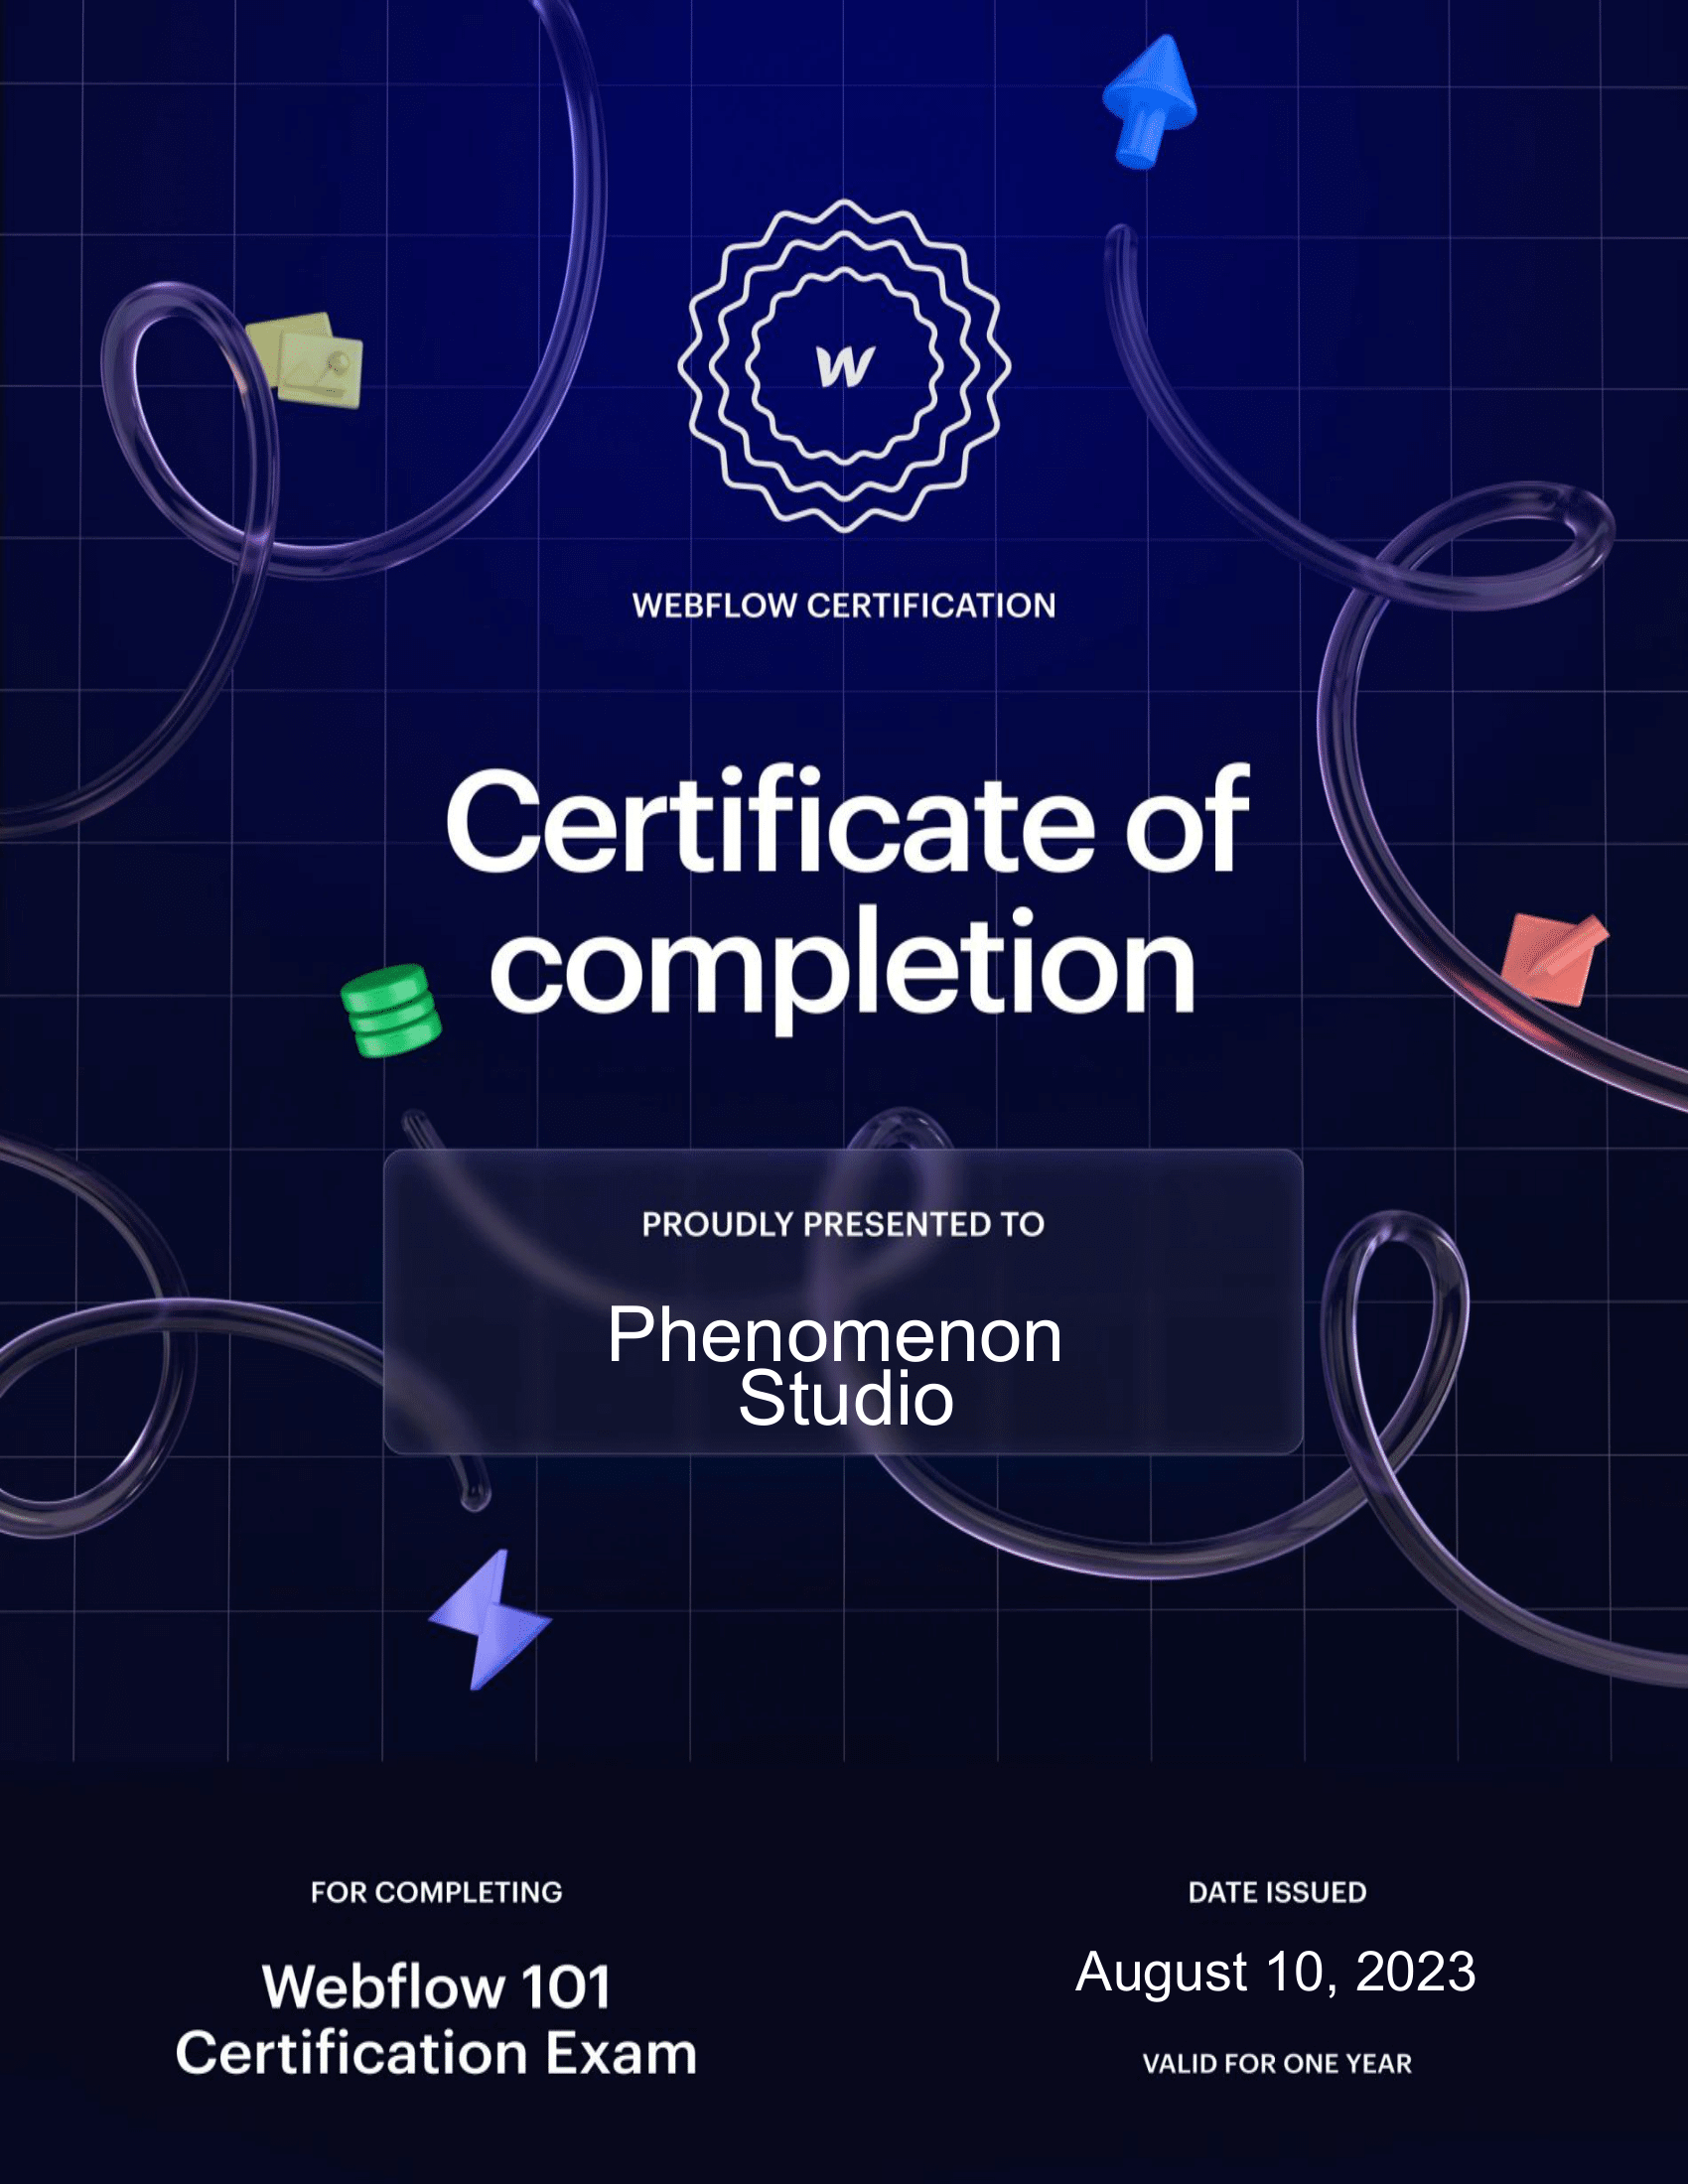 Phenomenon has received newly released Webflow certificates - Photo 2